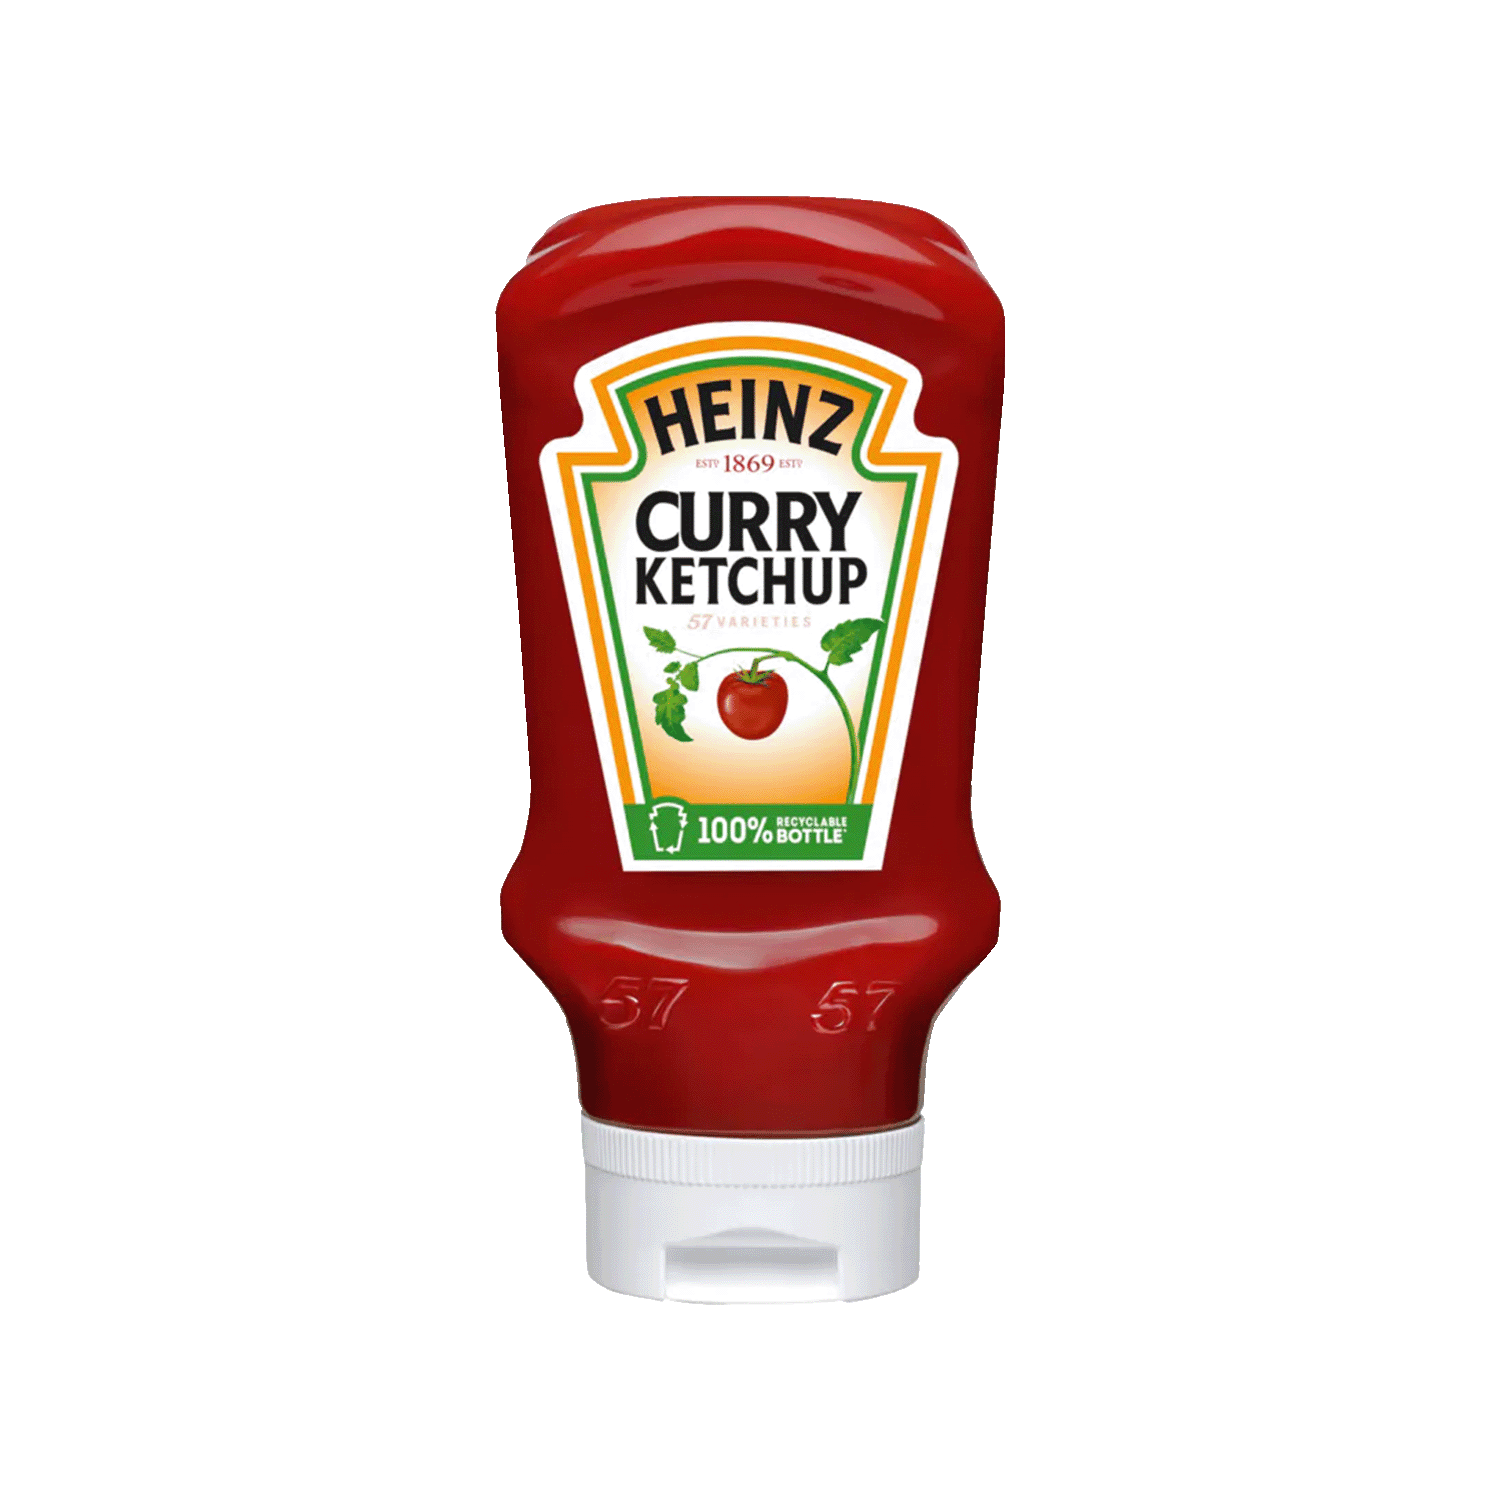 Curry Ketchup, 500ml